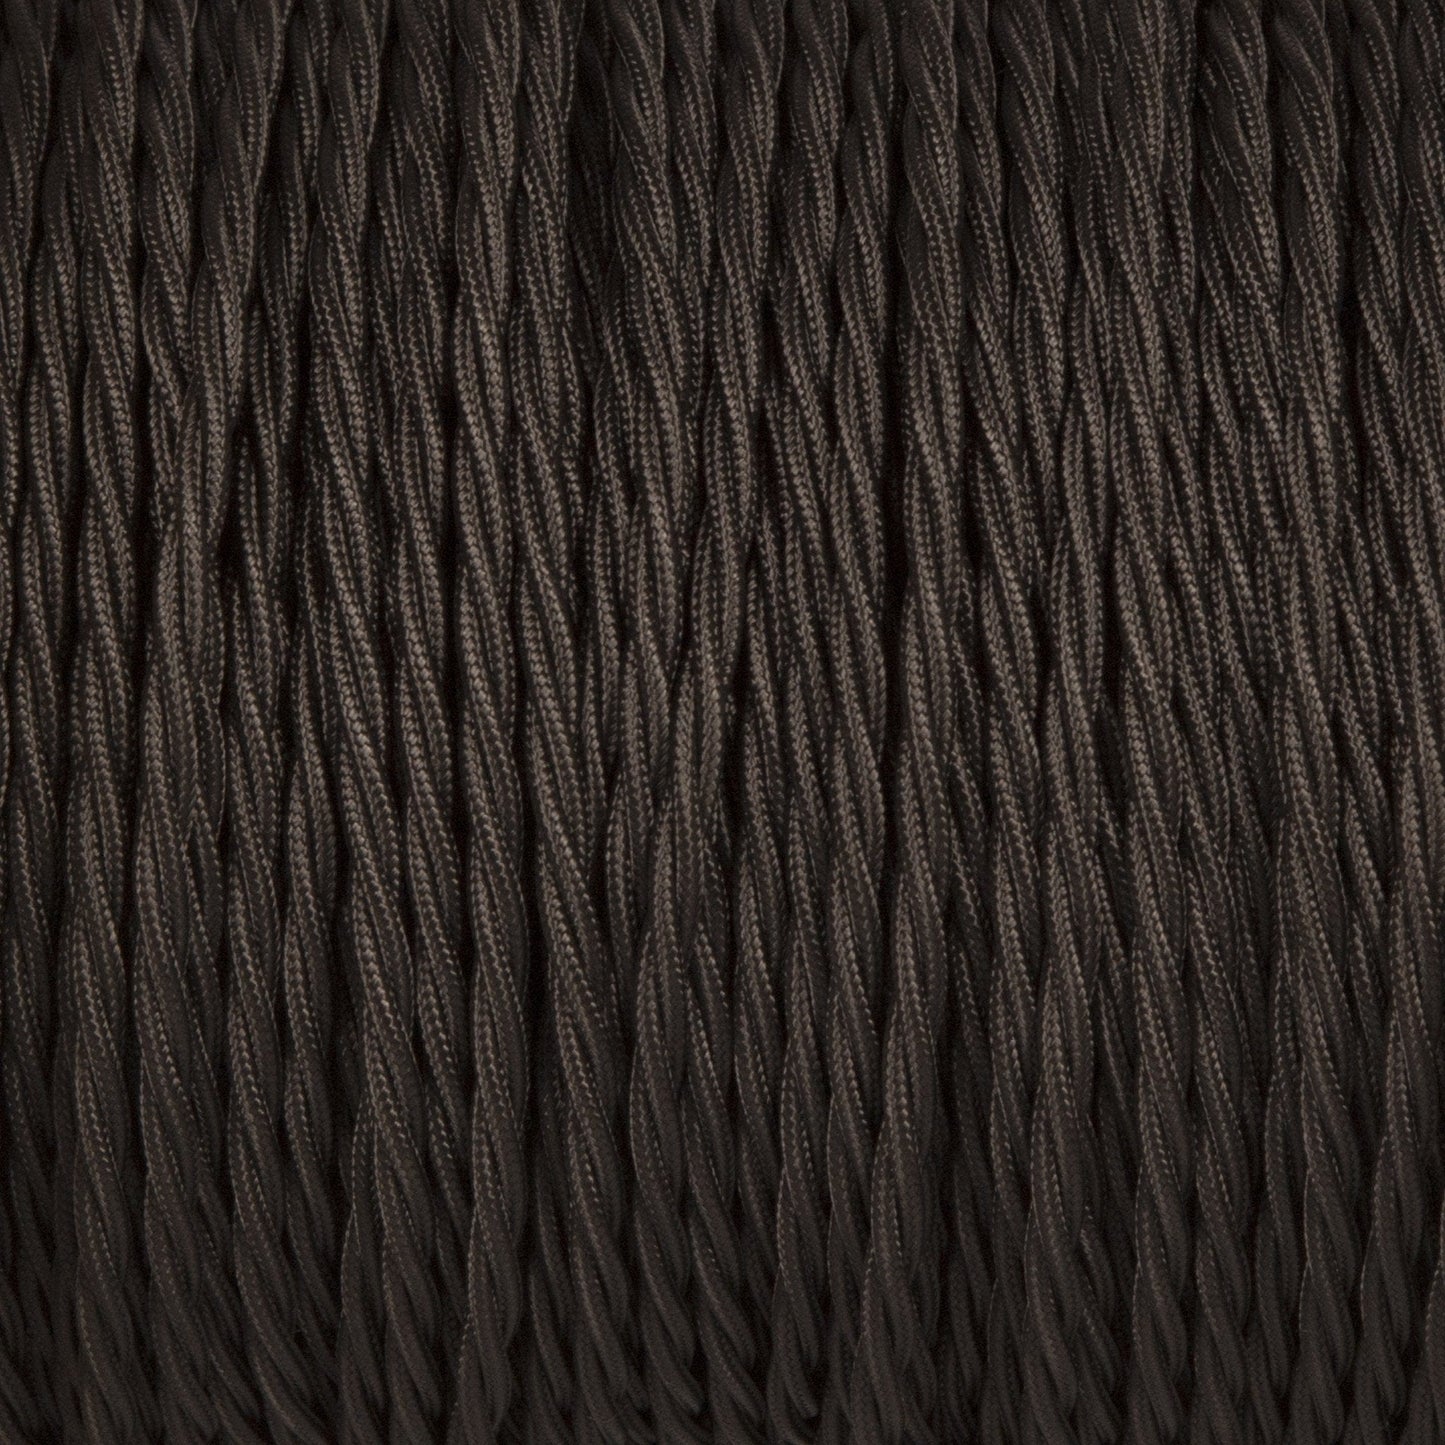 Black Twisted Fabric Braided Cable - Lightspares